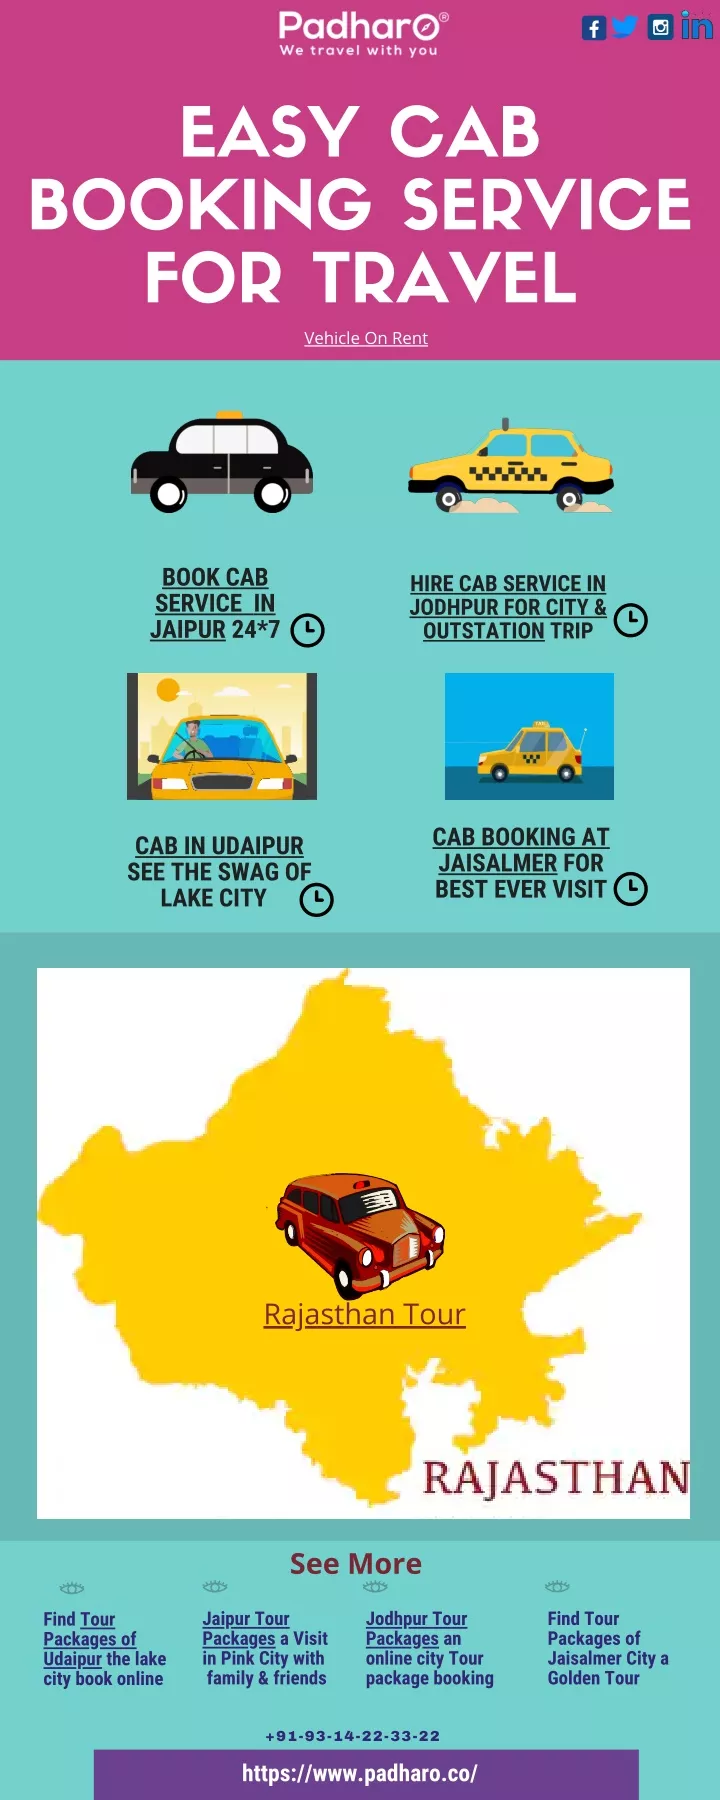 easy cab booking service for travel